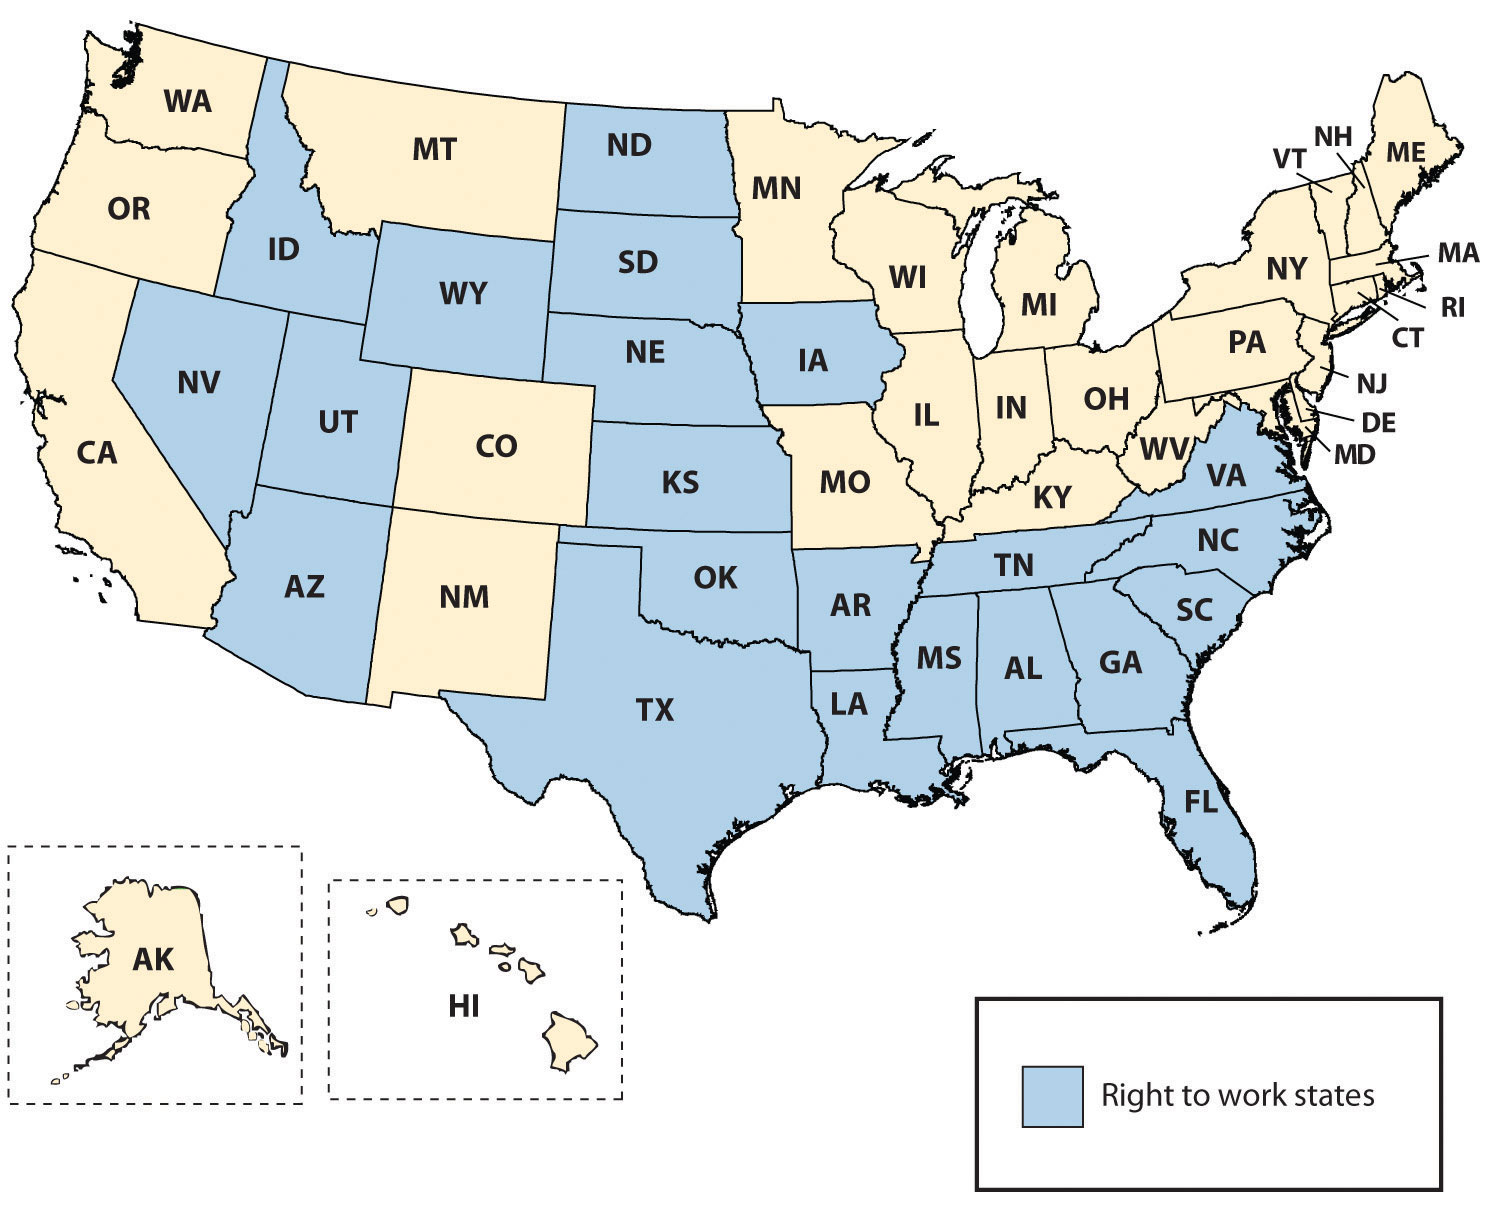 Map of Right-to-Work States